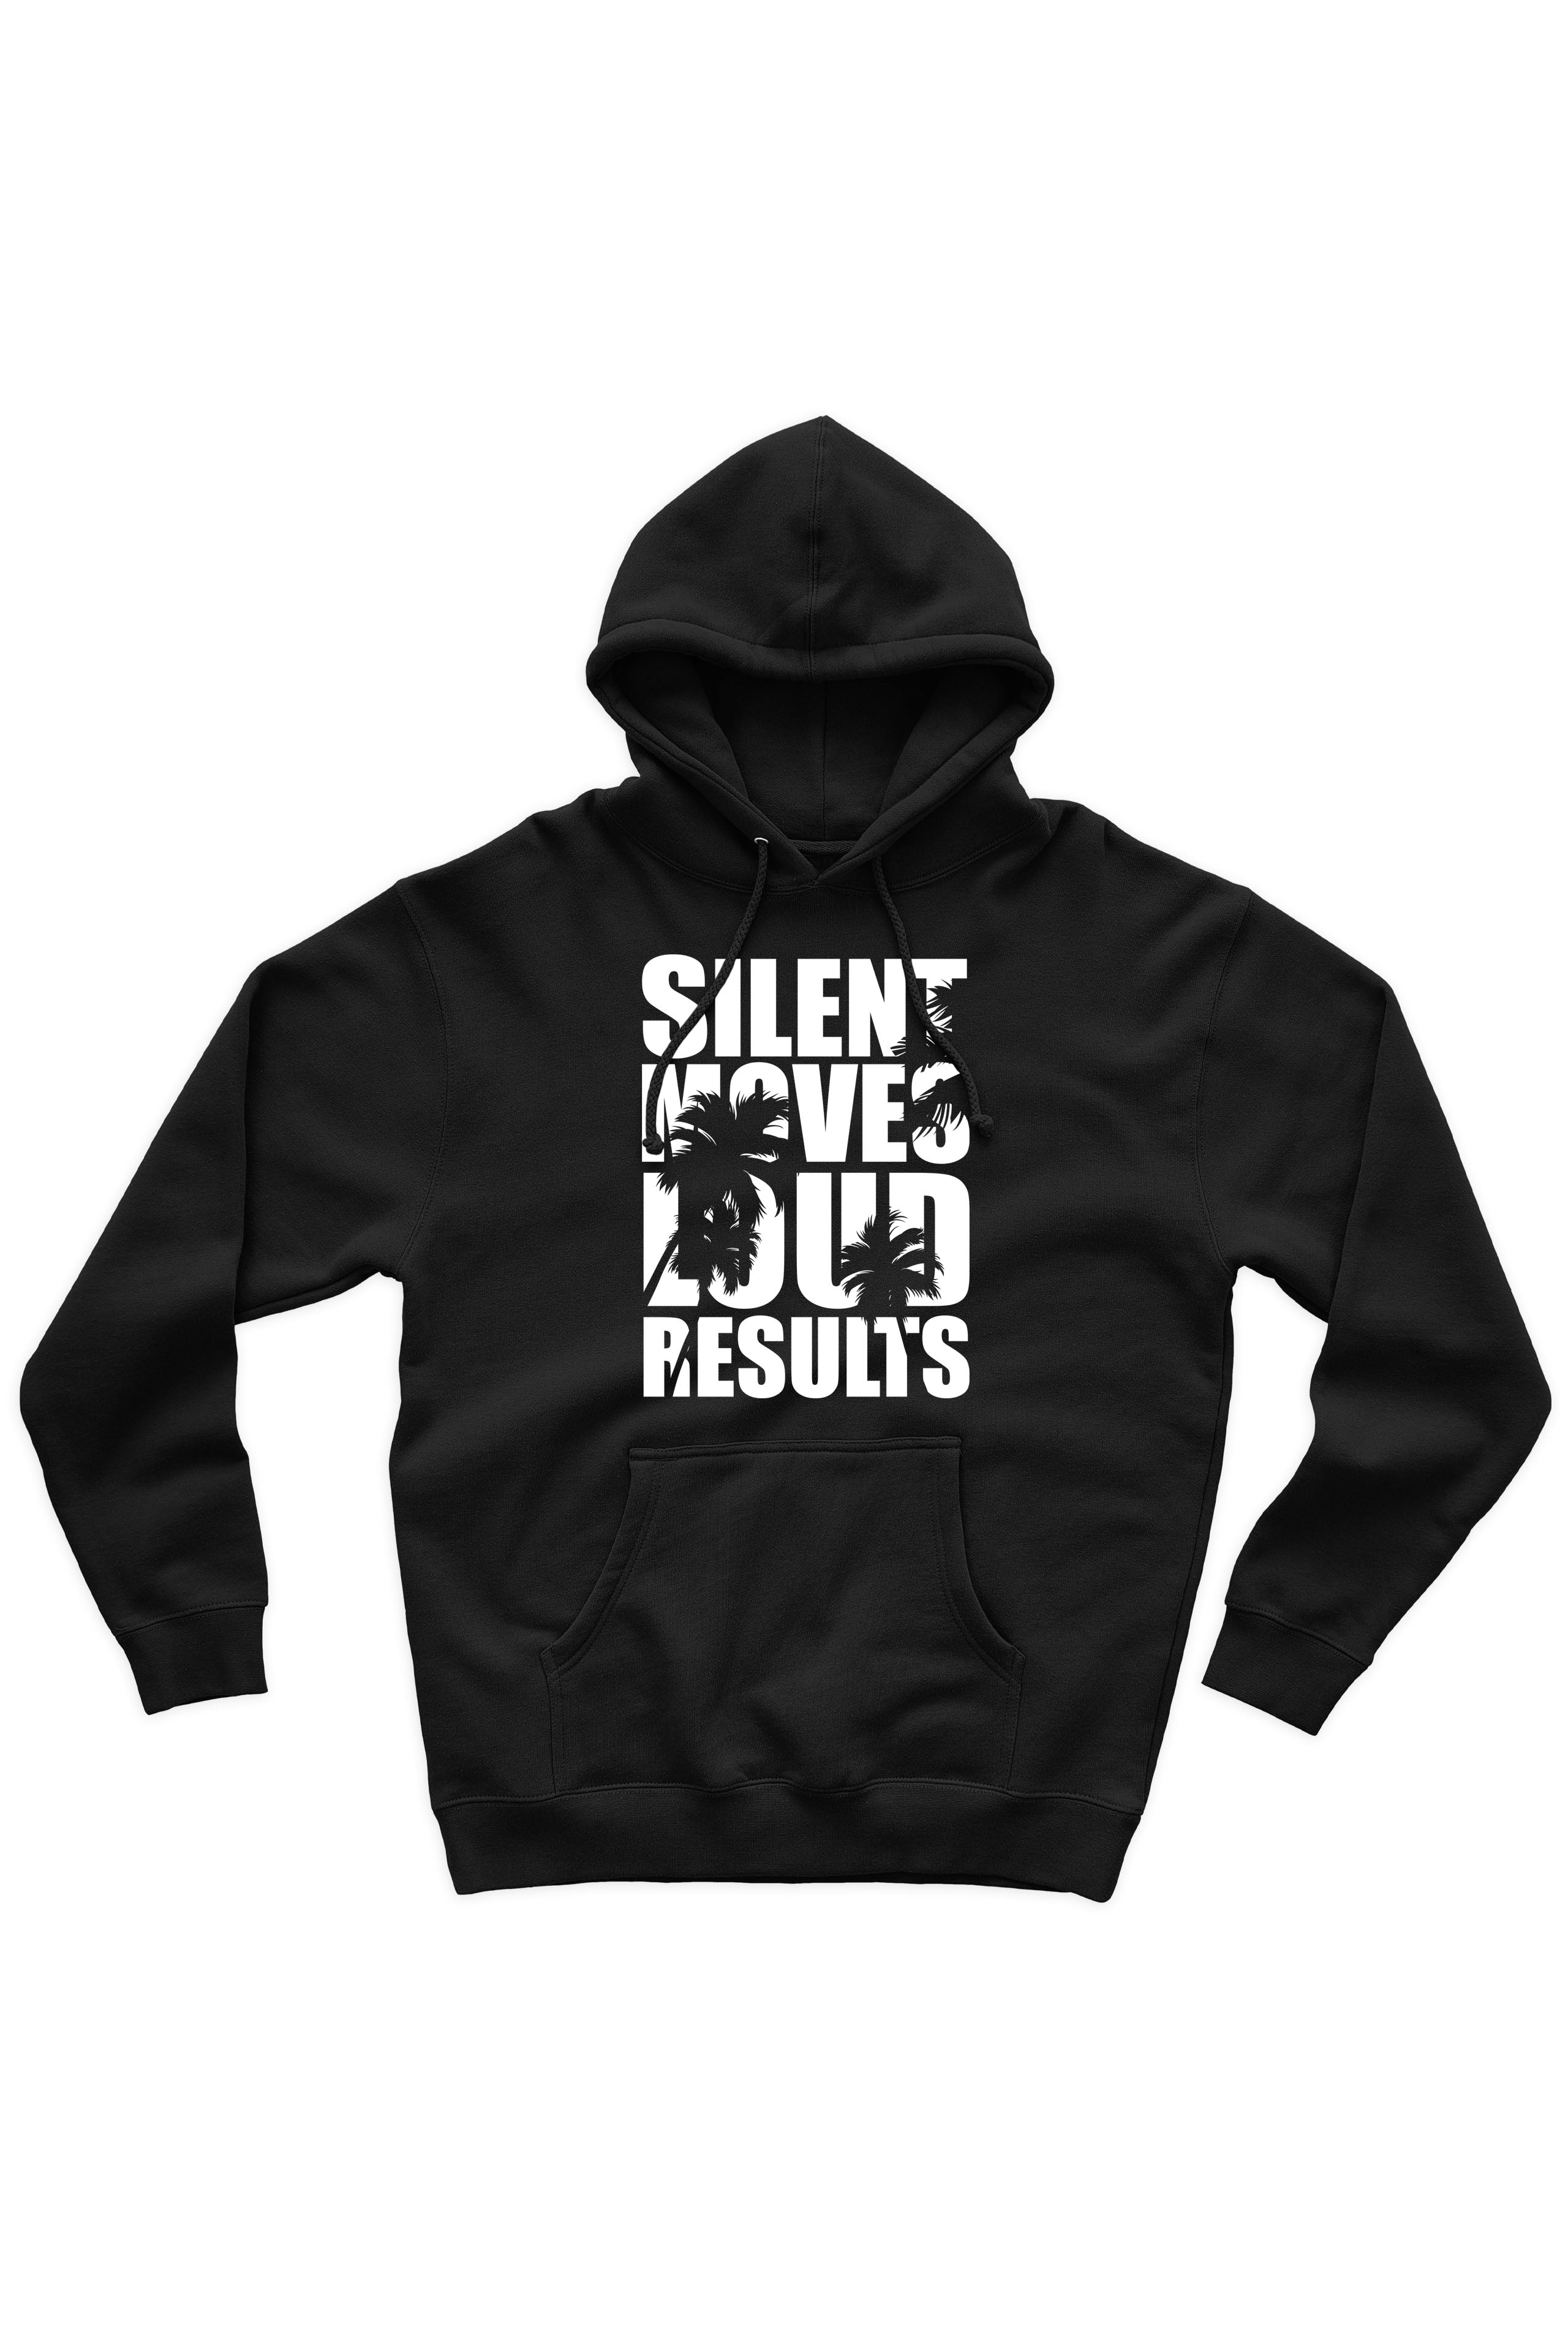 Silent Moves Hoodie (White Logo)